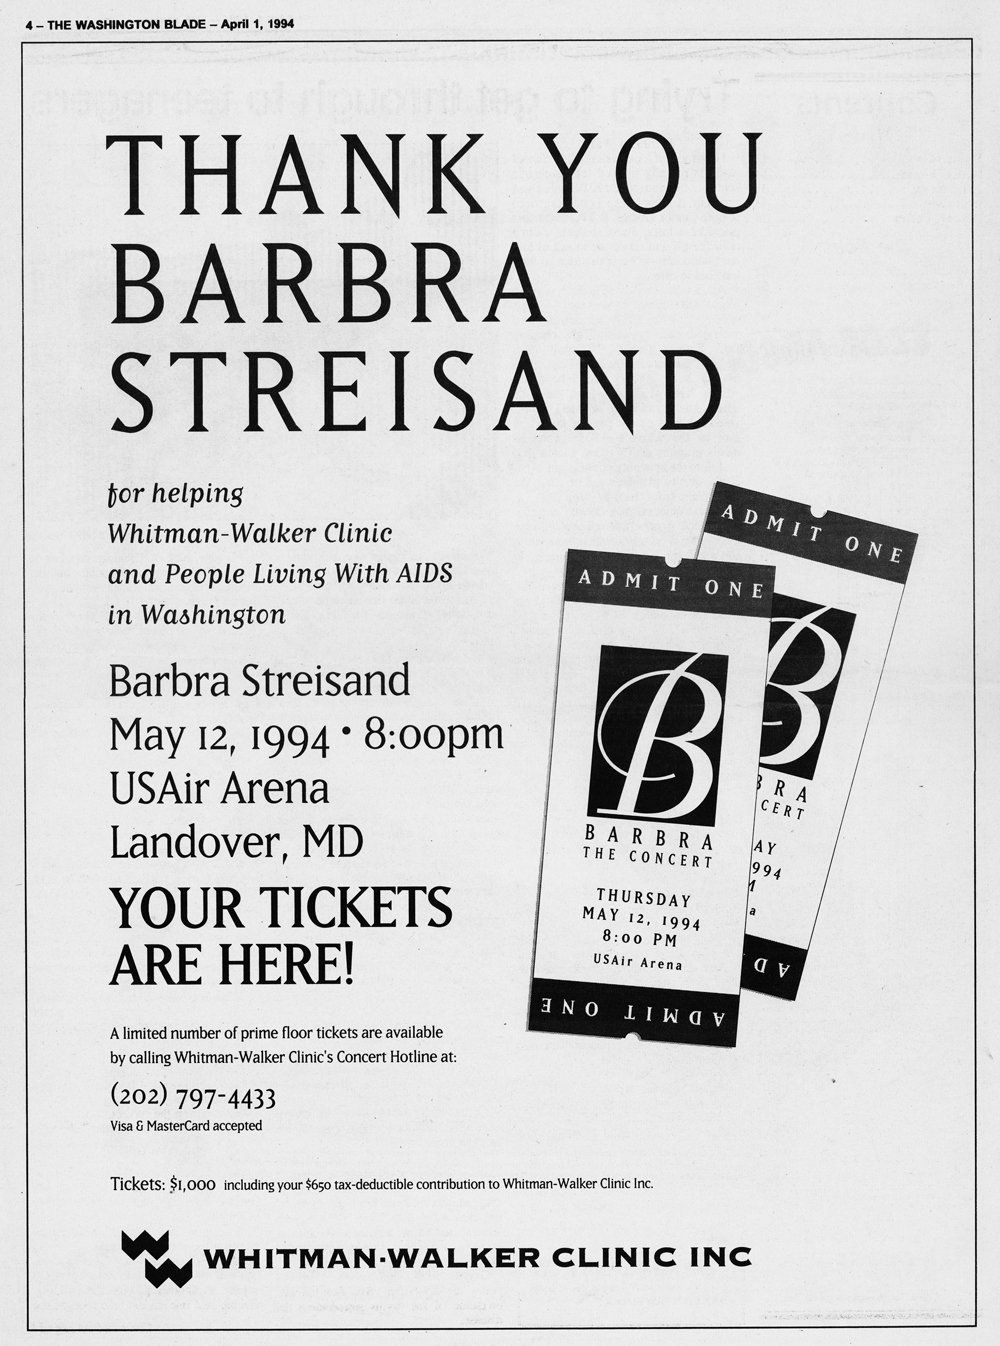 Thank you ad that ran in the Washington Blade for Streisand's fundraising concert tickets